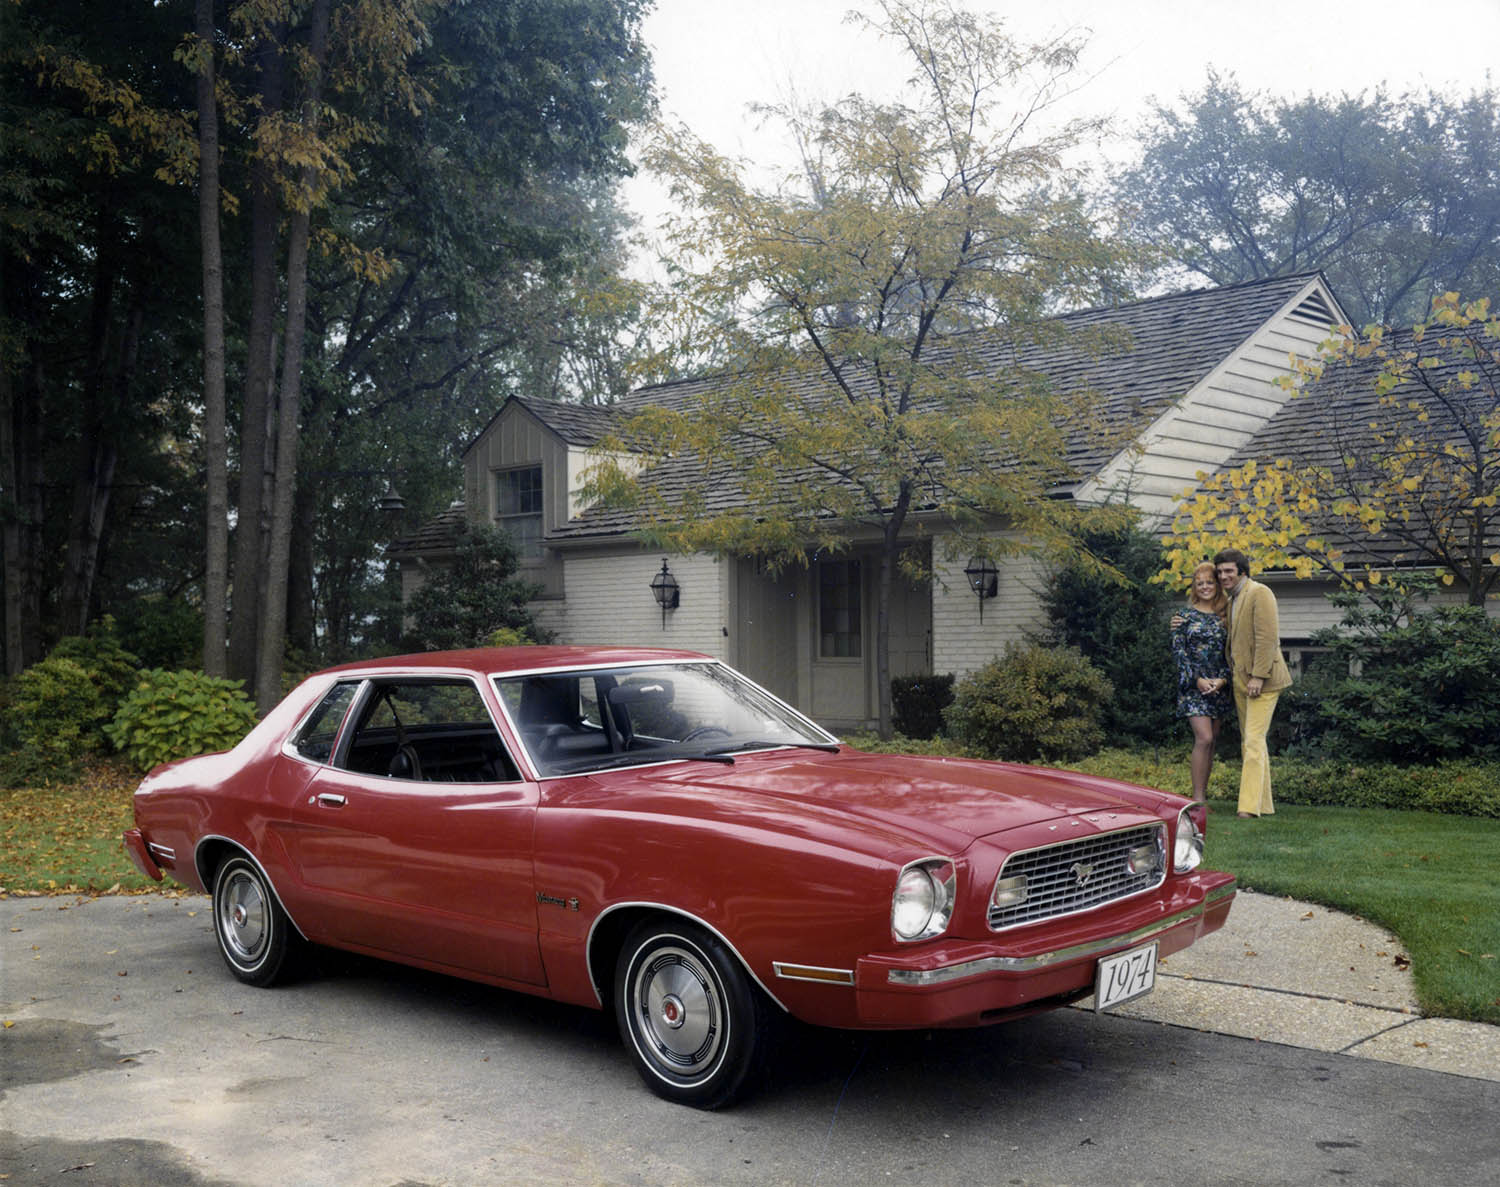 A couple gazes at a red 1974 Ford Mustang II with impact bumpers parked in front of a house